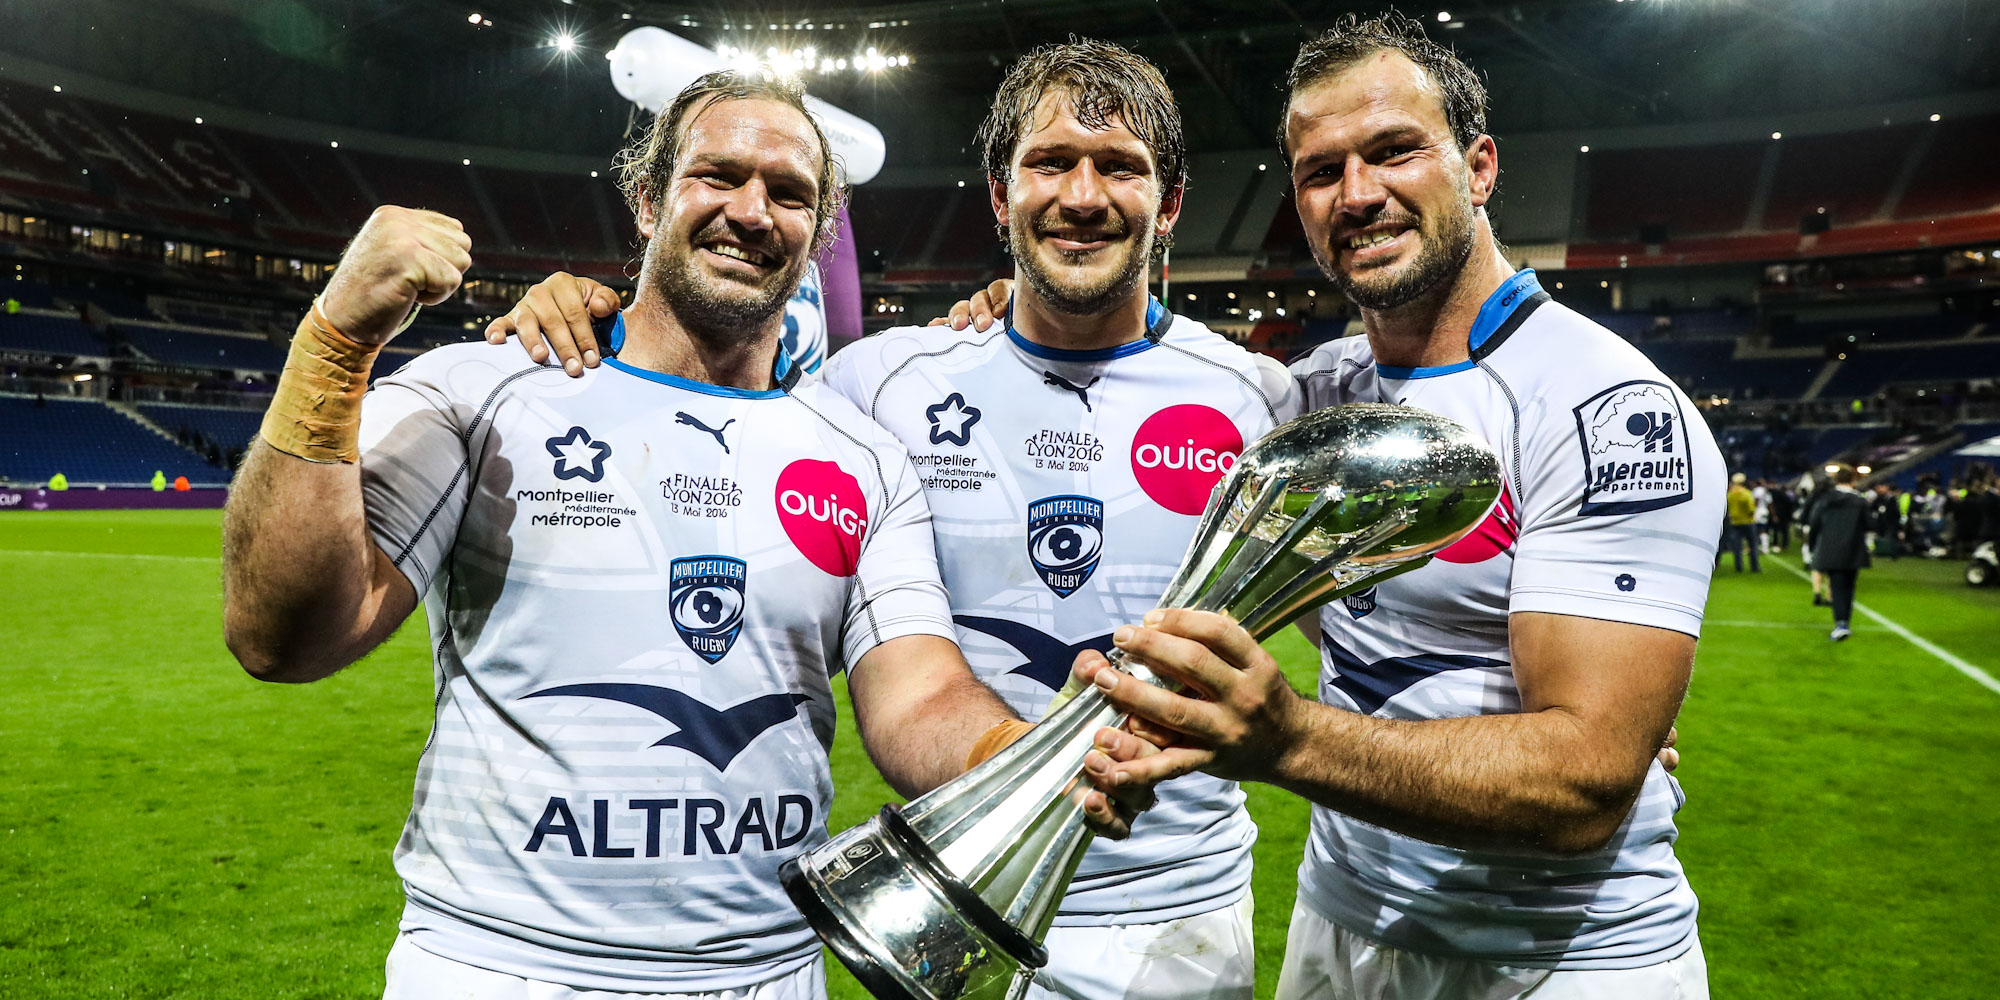 Celebrating European success with Montpellier, with Frans Steyn in the middle.